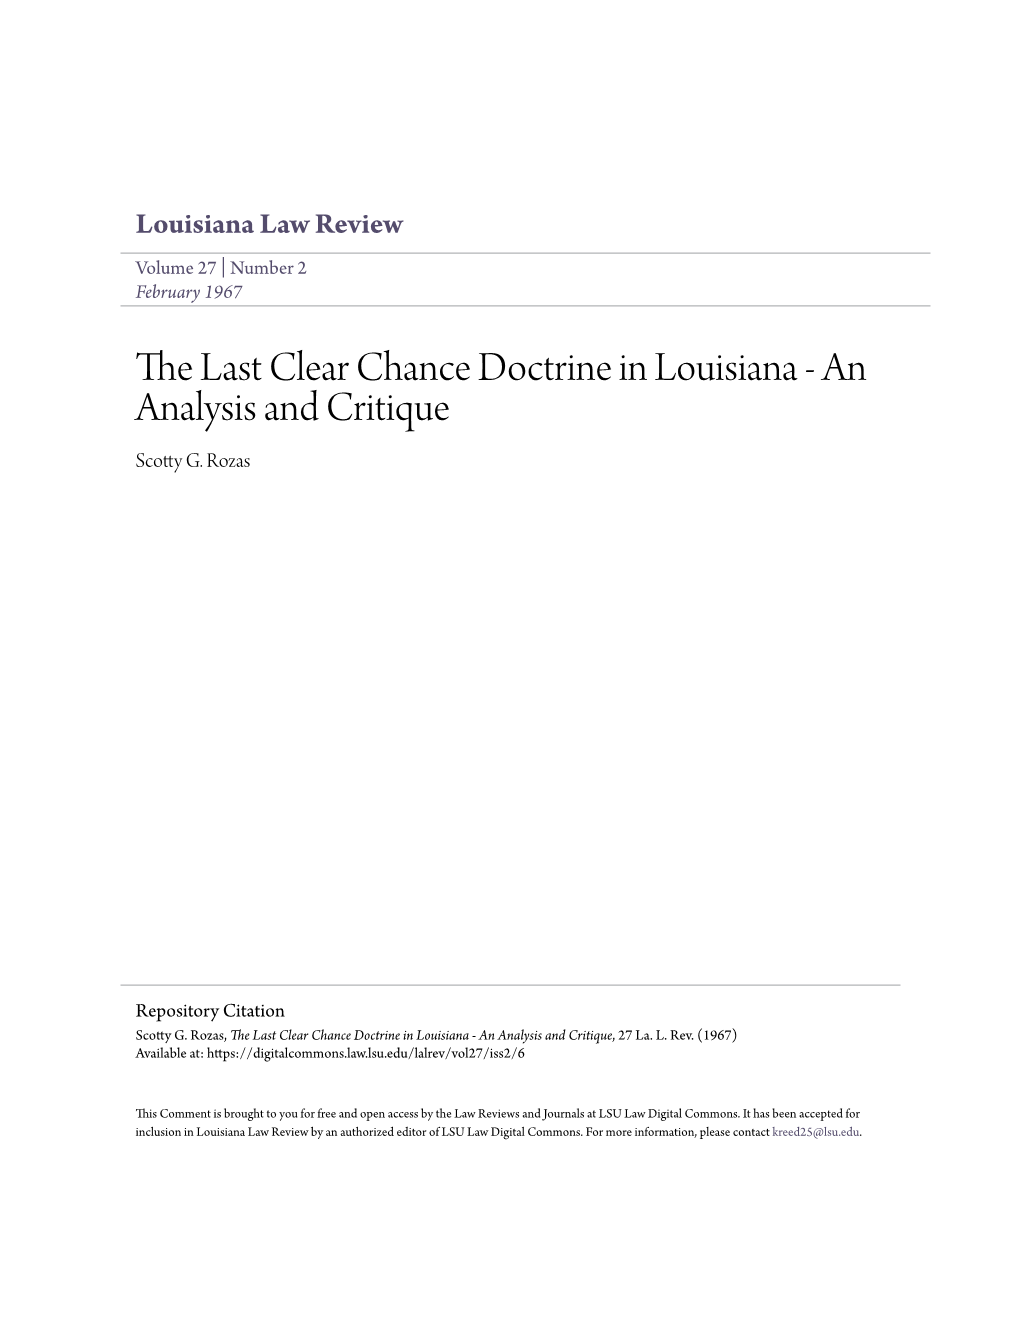 The Last Clear Chance Doctrine in Louisiana - an Analysis and Critique Scotty G